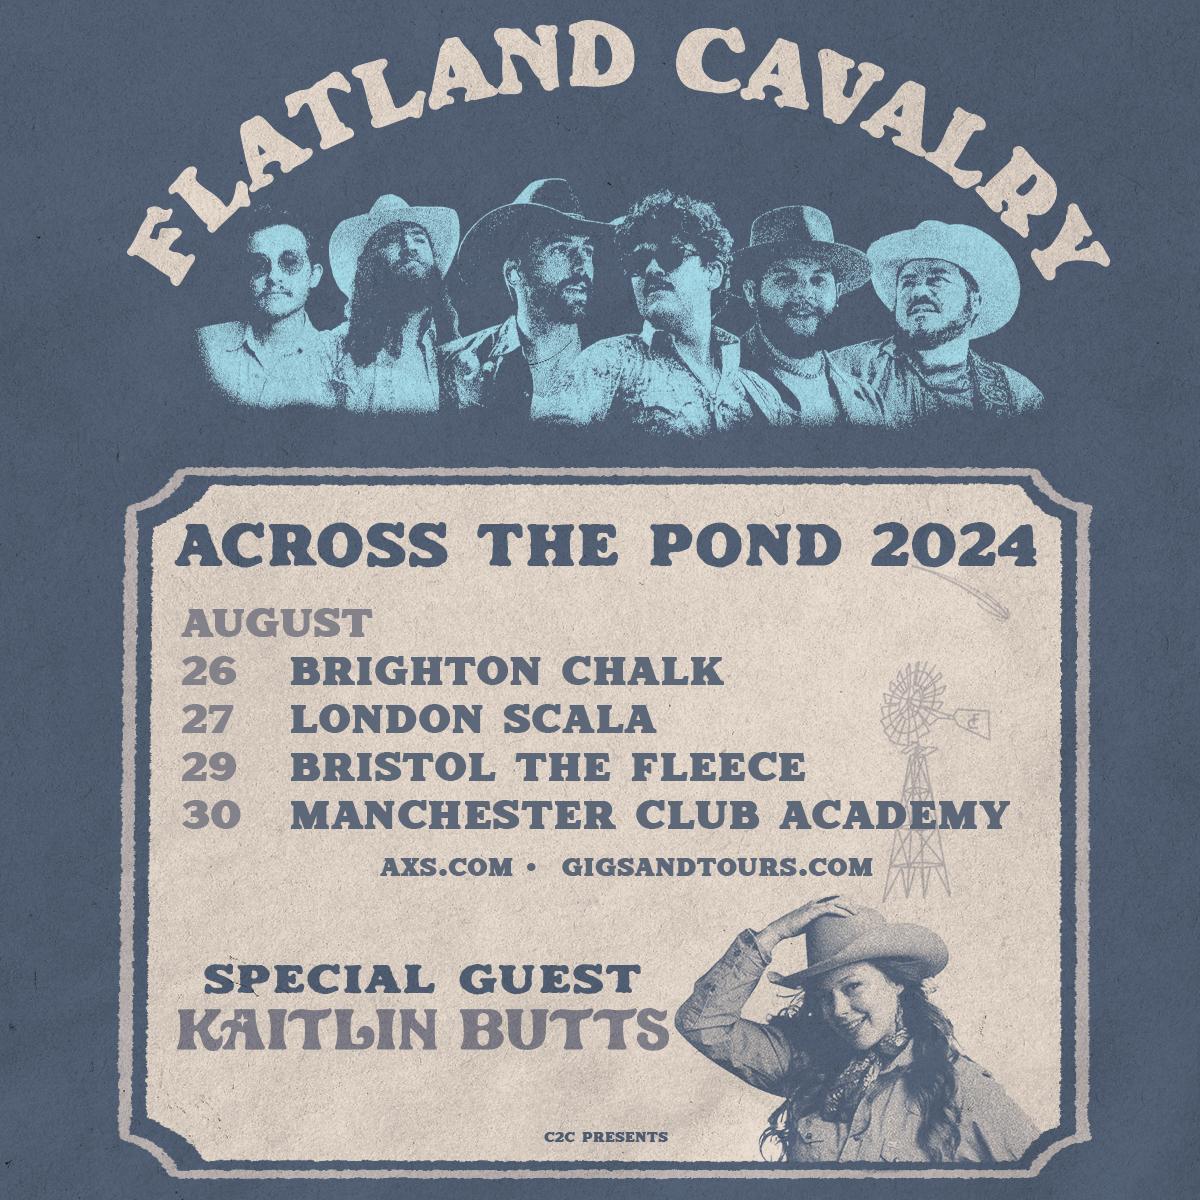 JUST ANNOUNCED: Flatland Cavalry on Aug 27! After years of hot trotting across their native Texas, the country outfit is primed for a breakout, following the release of their third album, Welcome to Countryland. Tickets go live Friday @ 10am: scala.co.uk/events/flatlan…